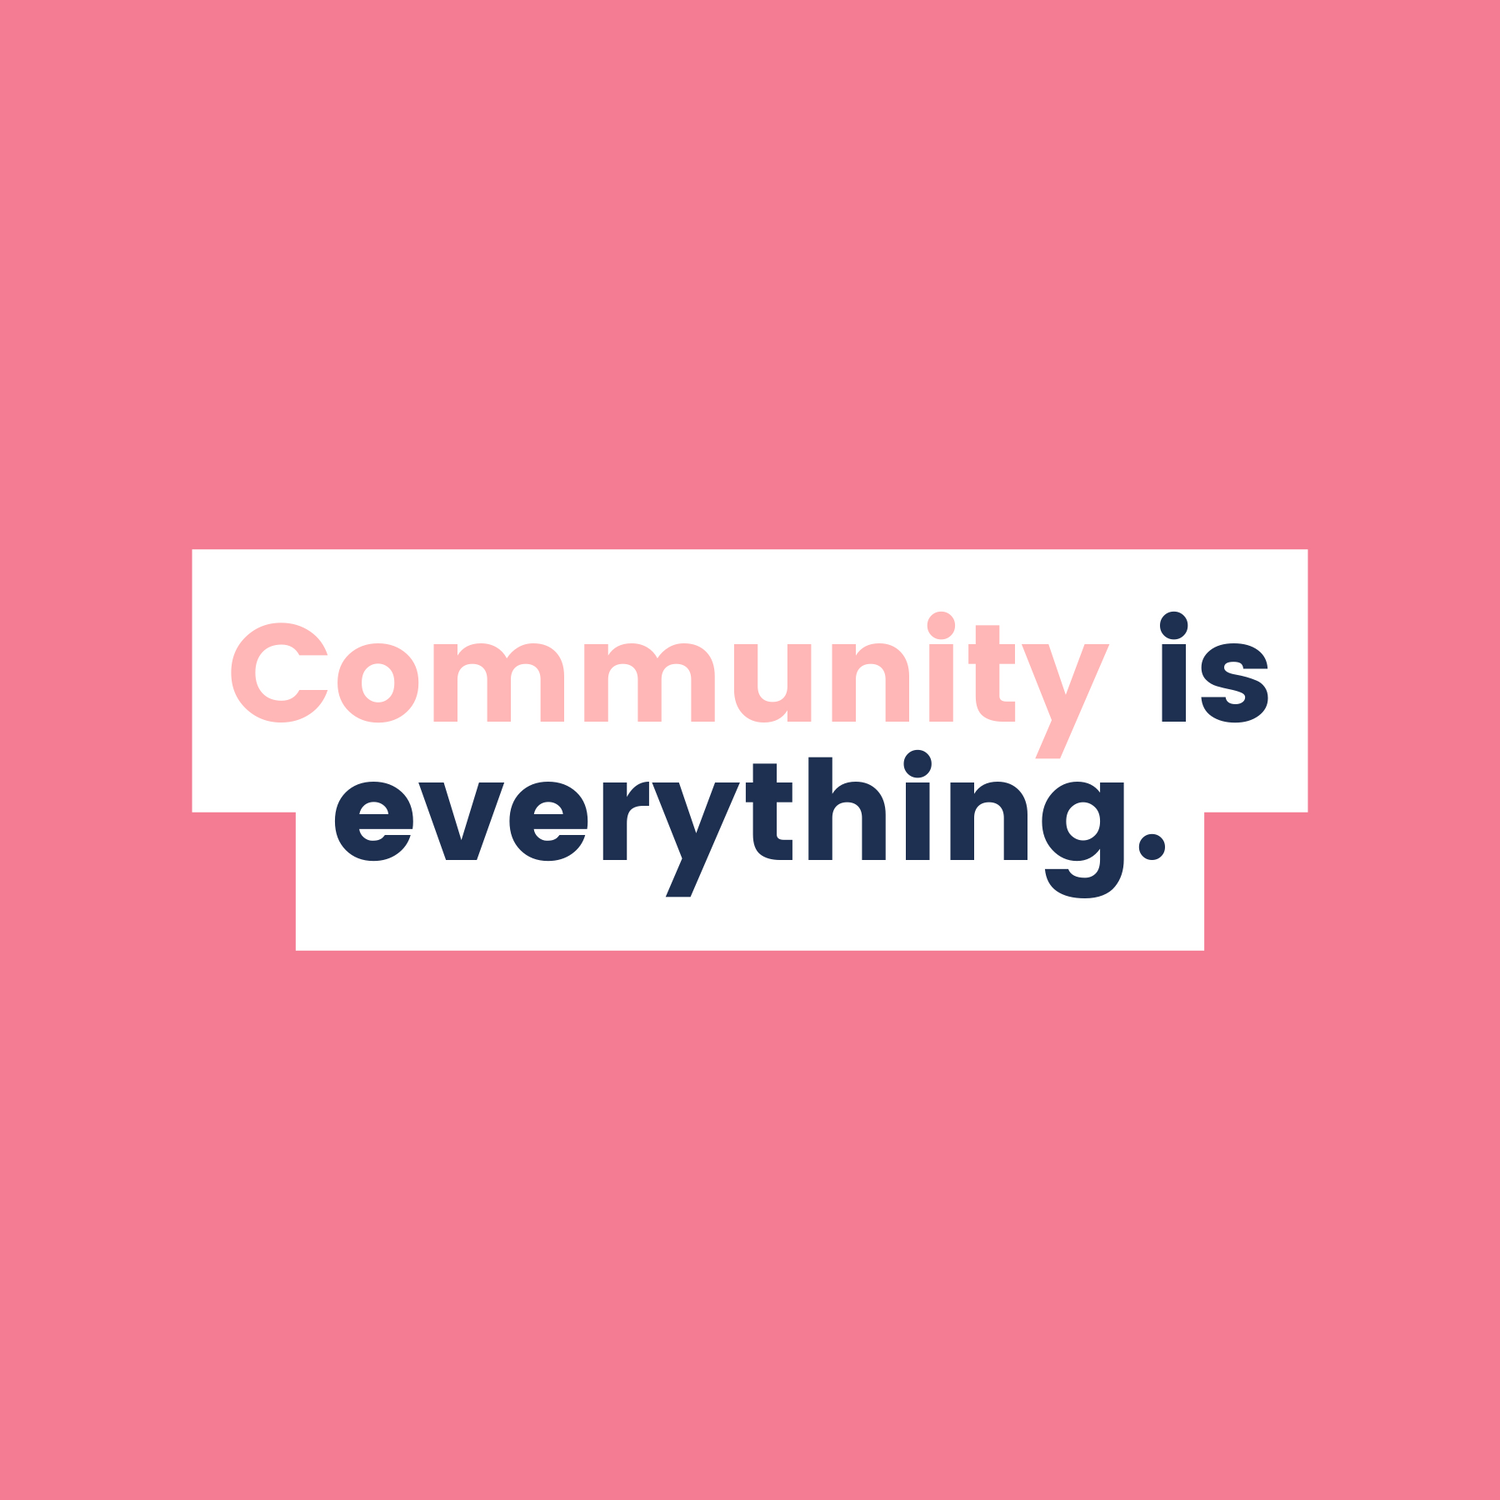 Community is everything, especially when you're running an ethical, sustainable, circular or slow fashion business.